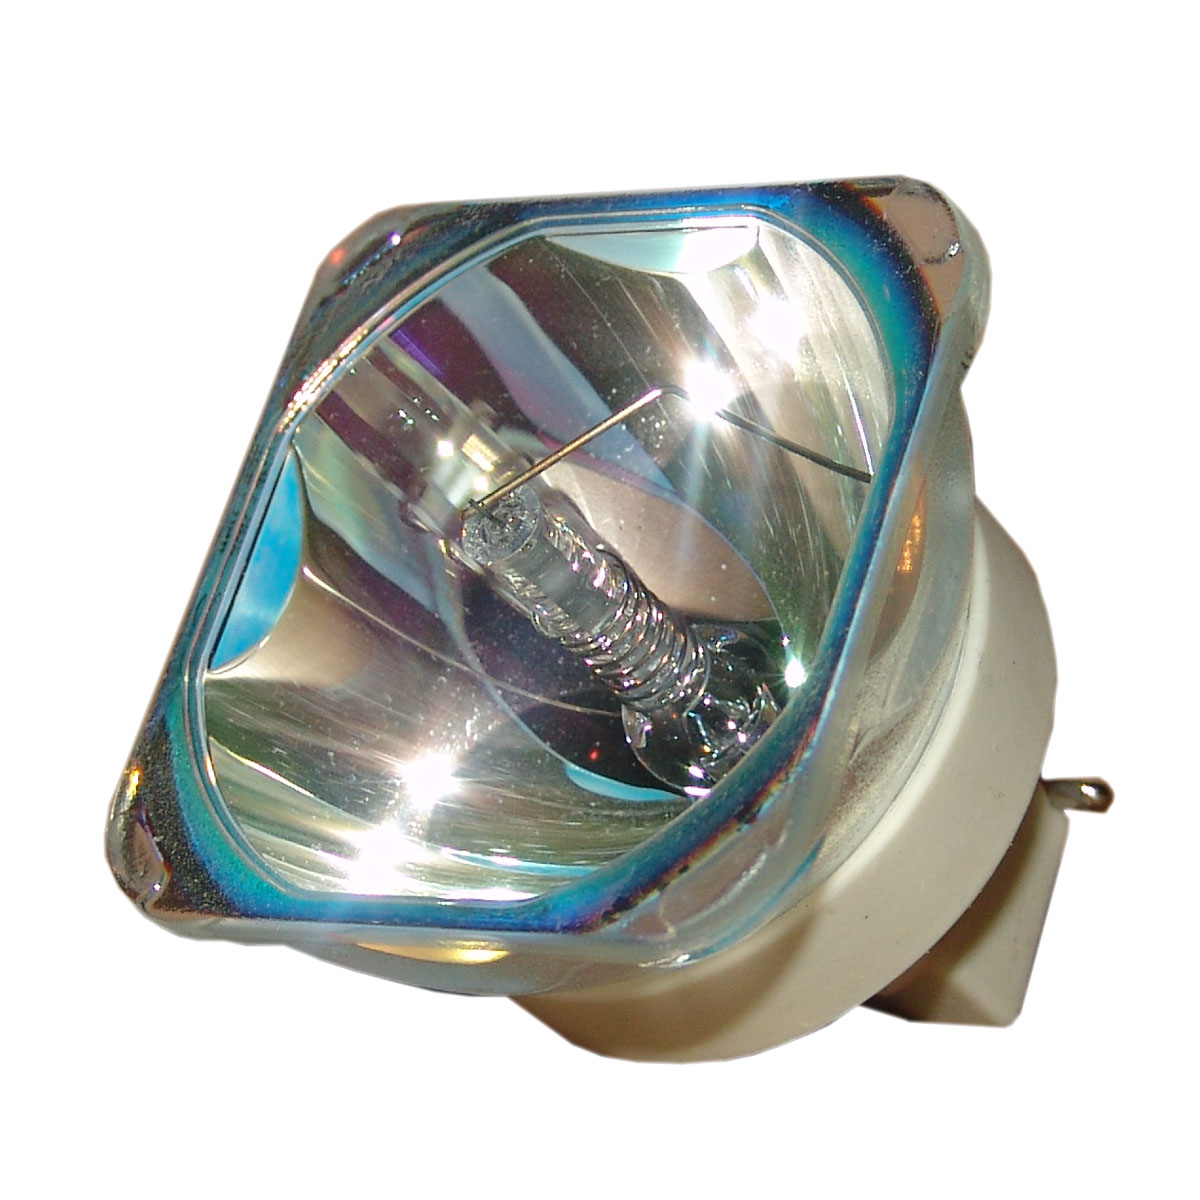 Lutema Economy Bulb for Hitachi DT01471 Projector (Lamp Only) - image 1 of 6